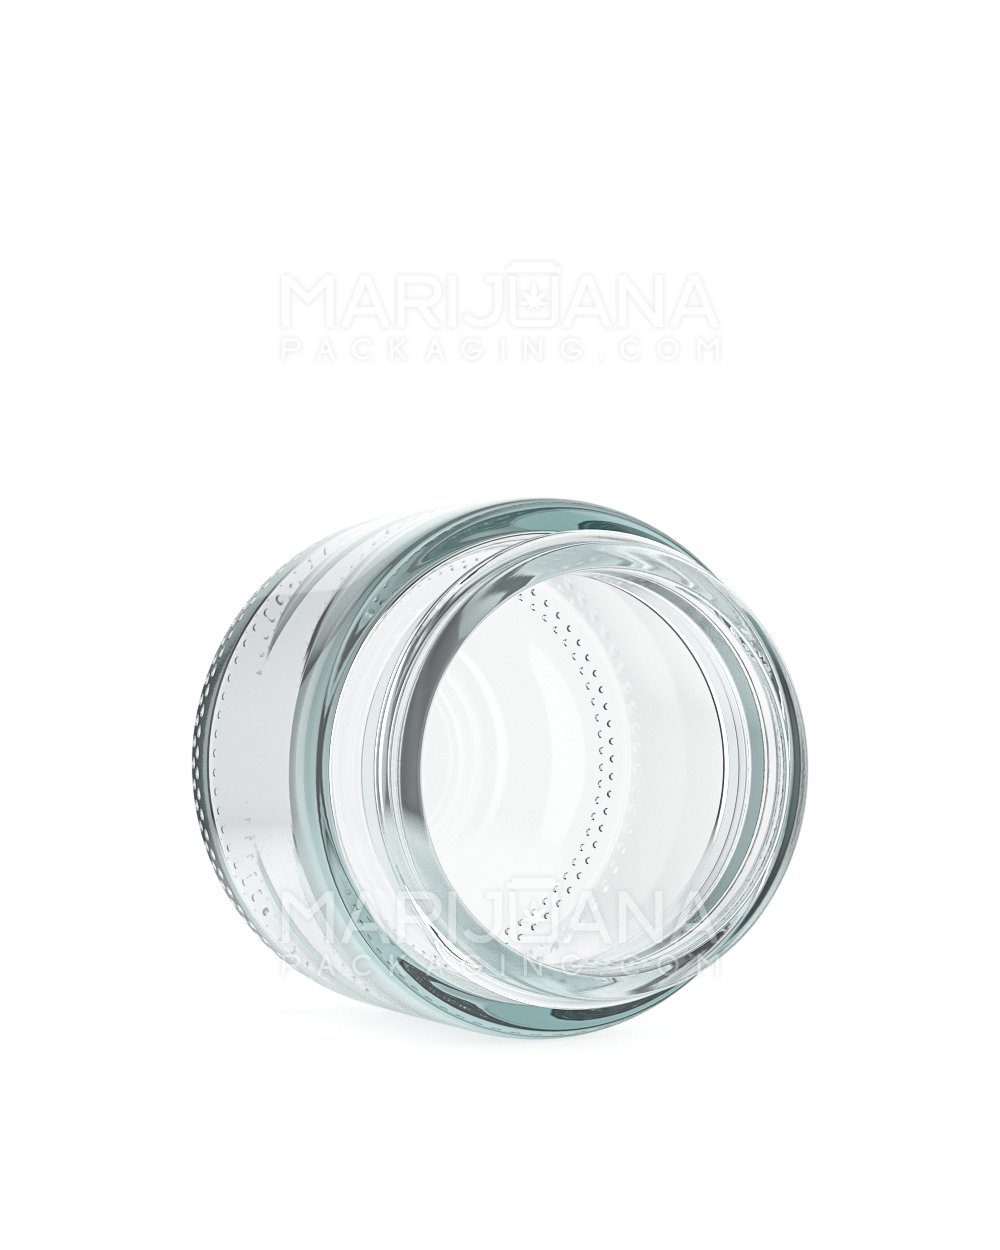 Straight Sided Clear Glass Jars | 53mm - 2.5oz - 84 Count - 4